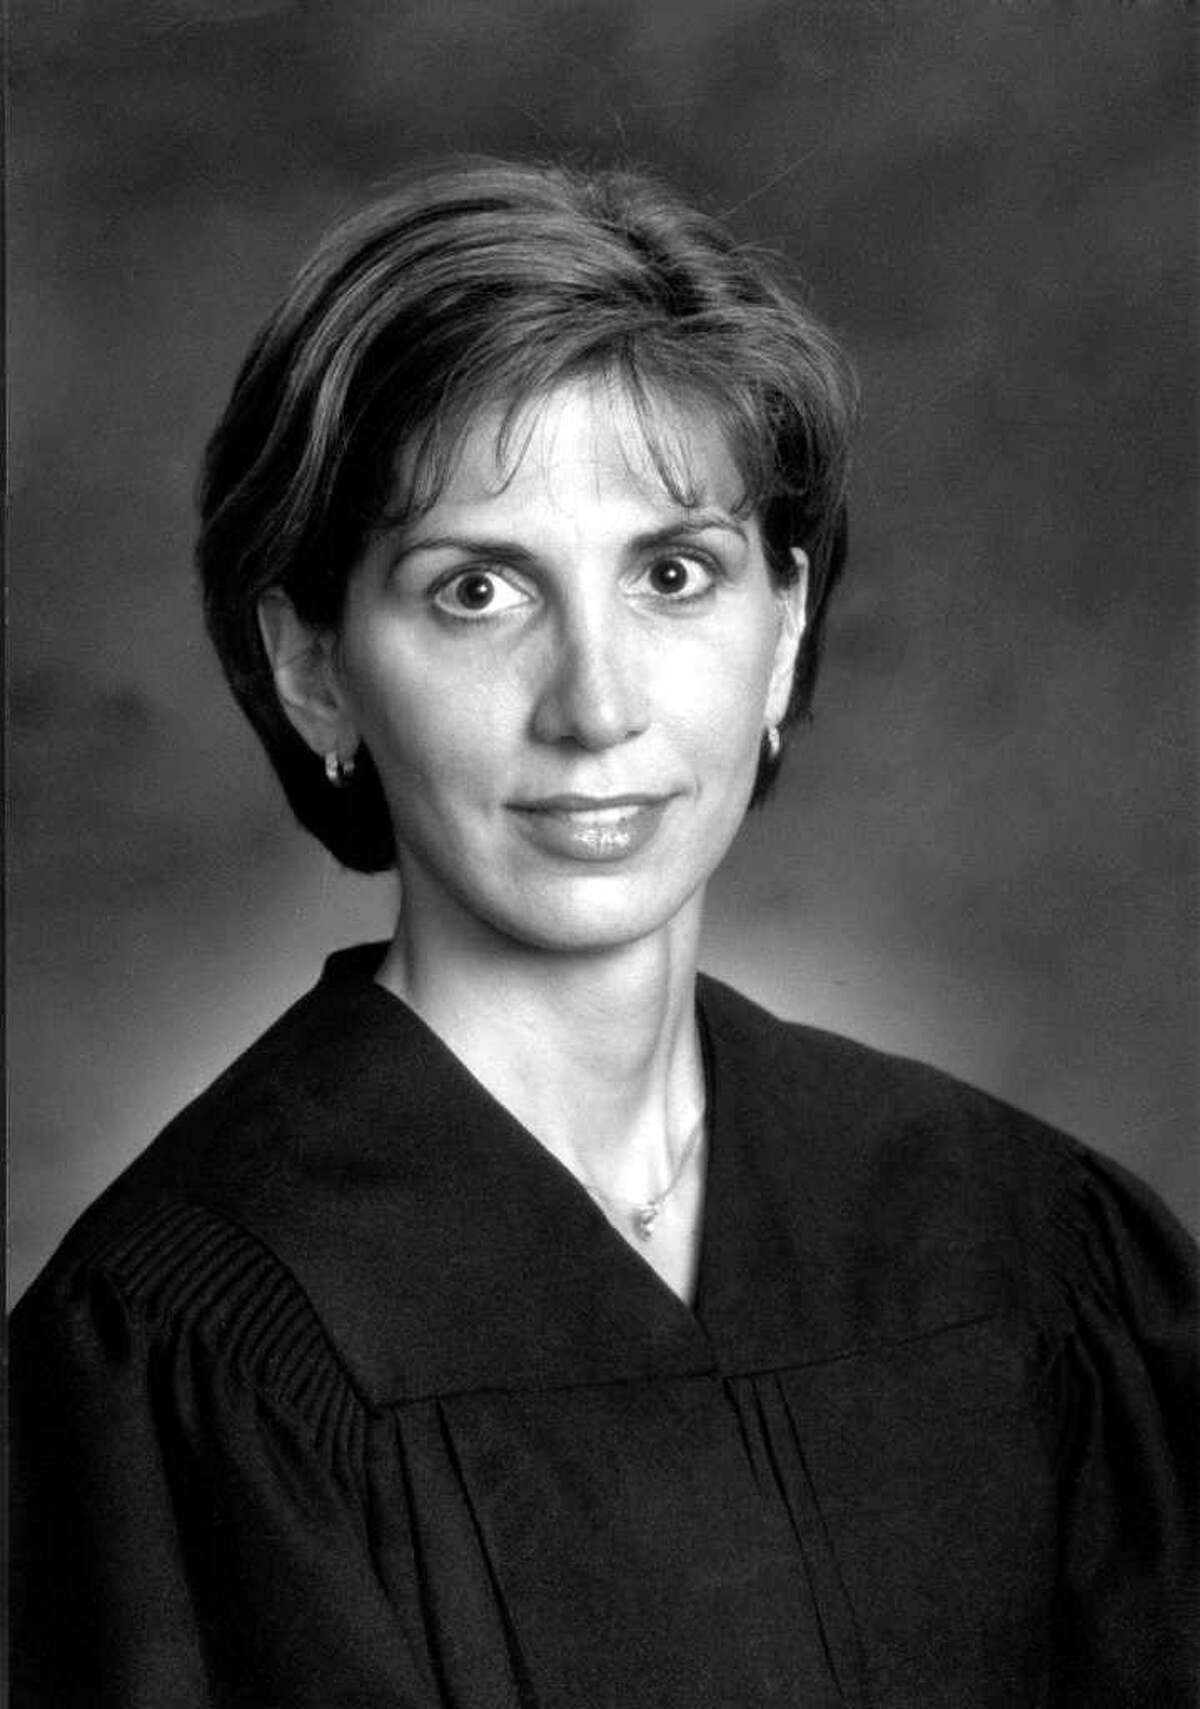 Rensselaer County Family Court Judge Catherine "KiKi" Cholakis, a Republican running for state Supreme Court in the Third Judicial District